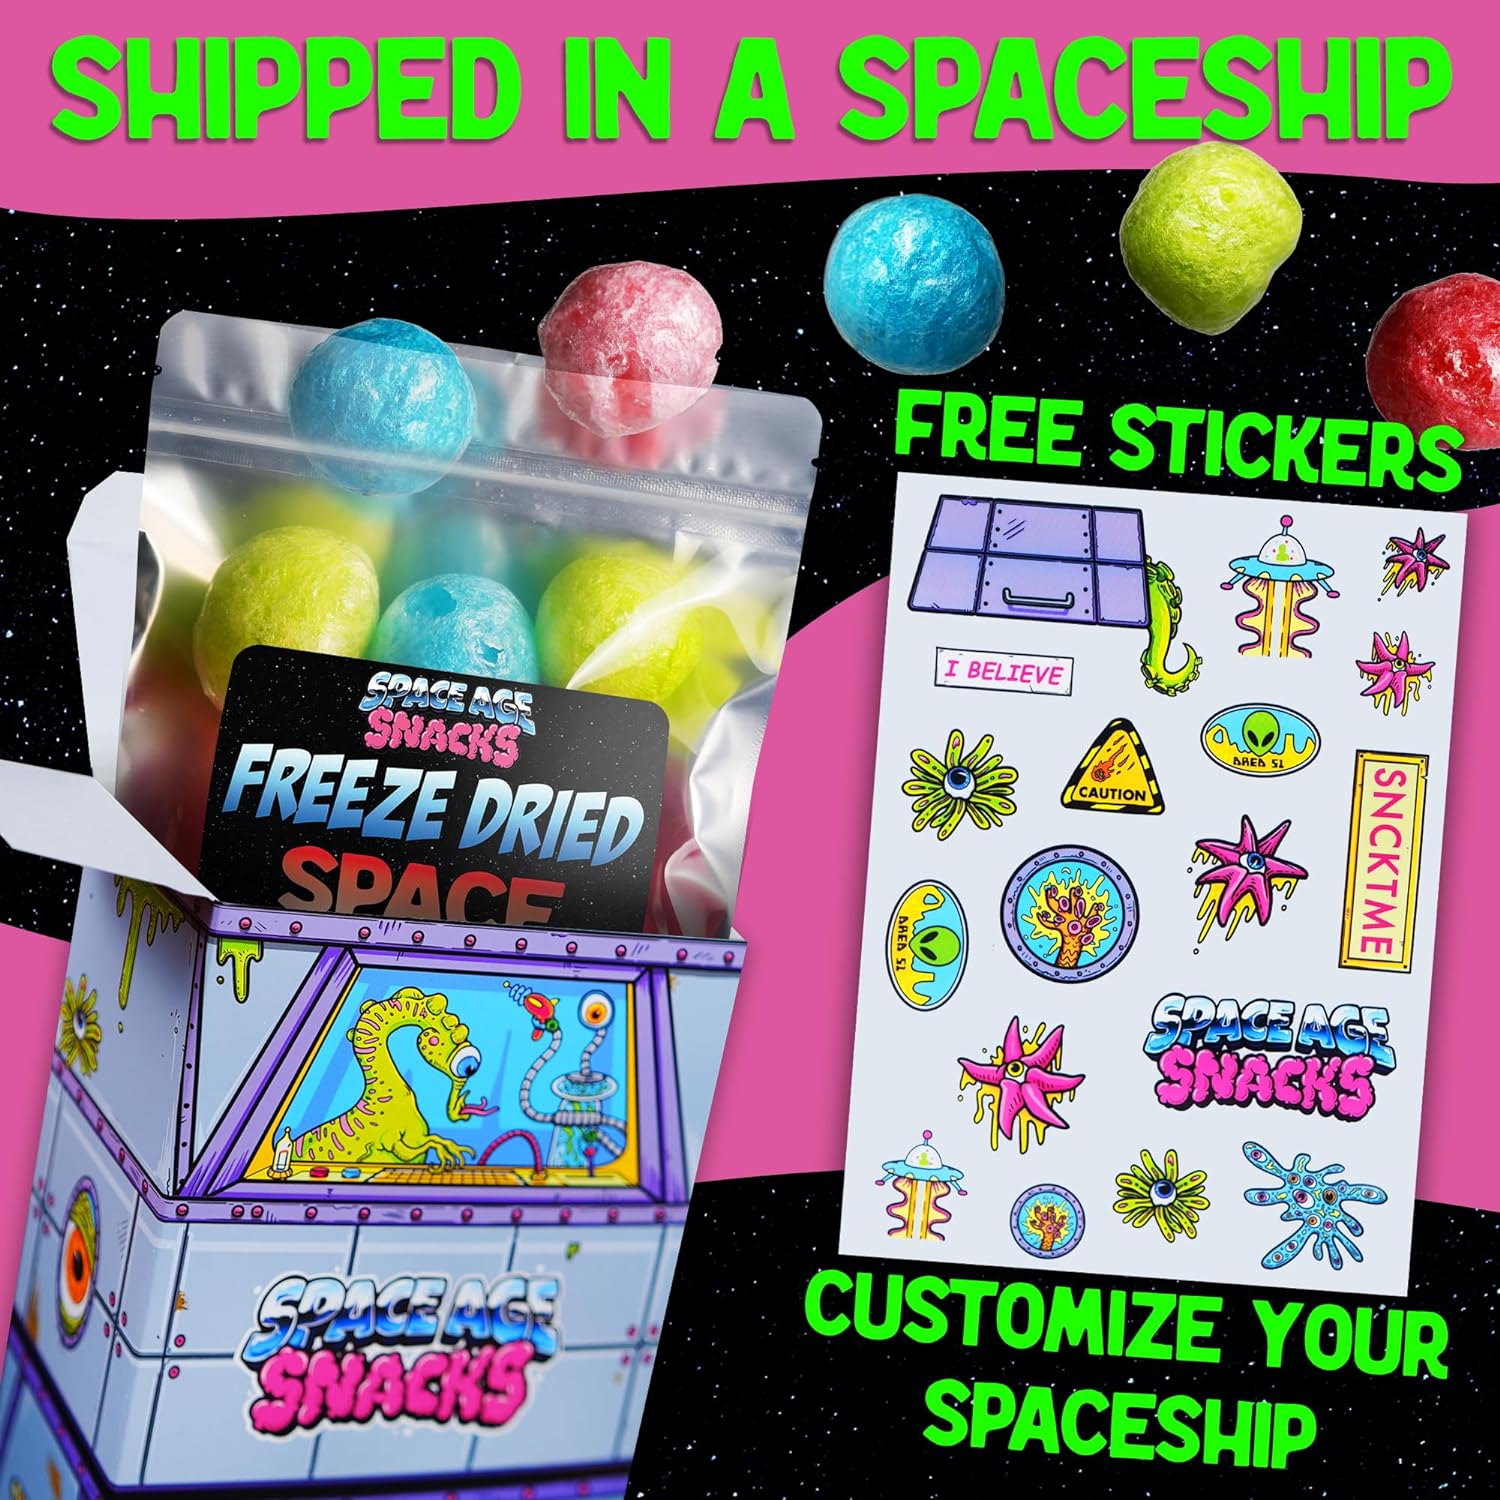 Freeze Dried Space Balls Candy